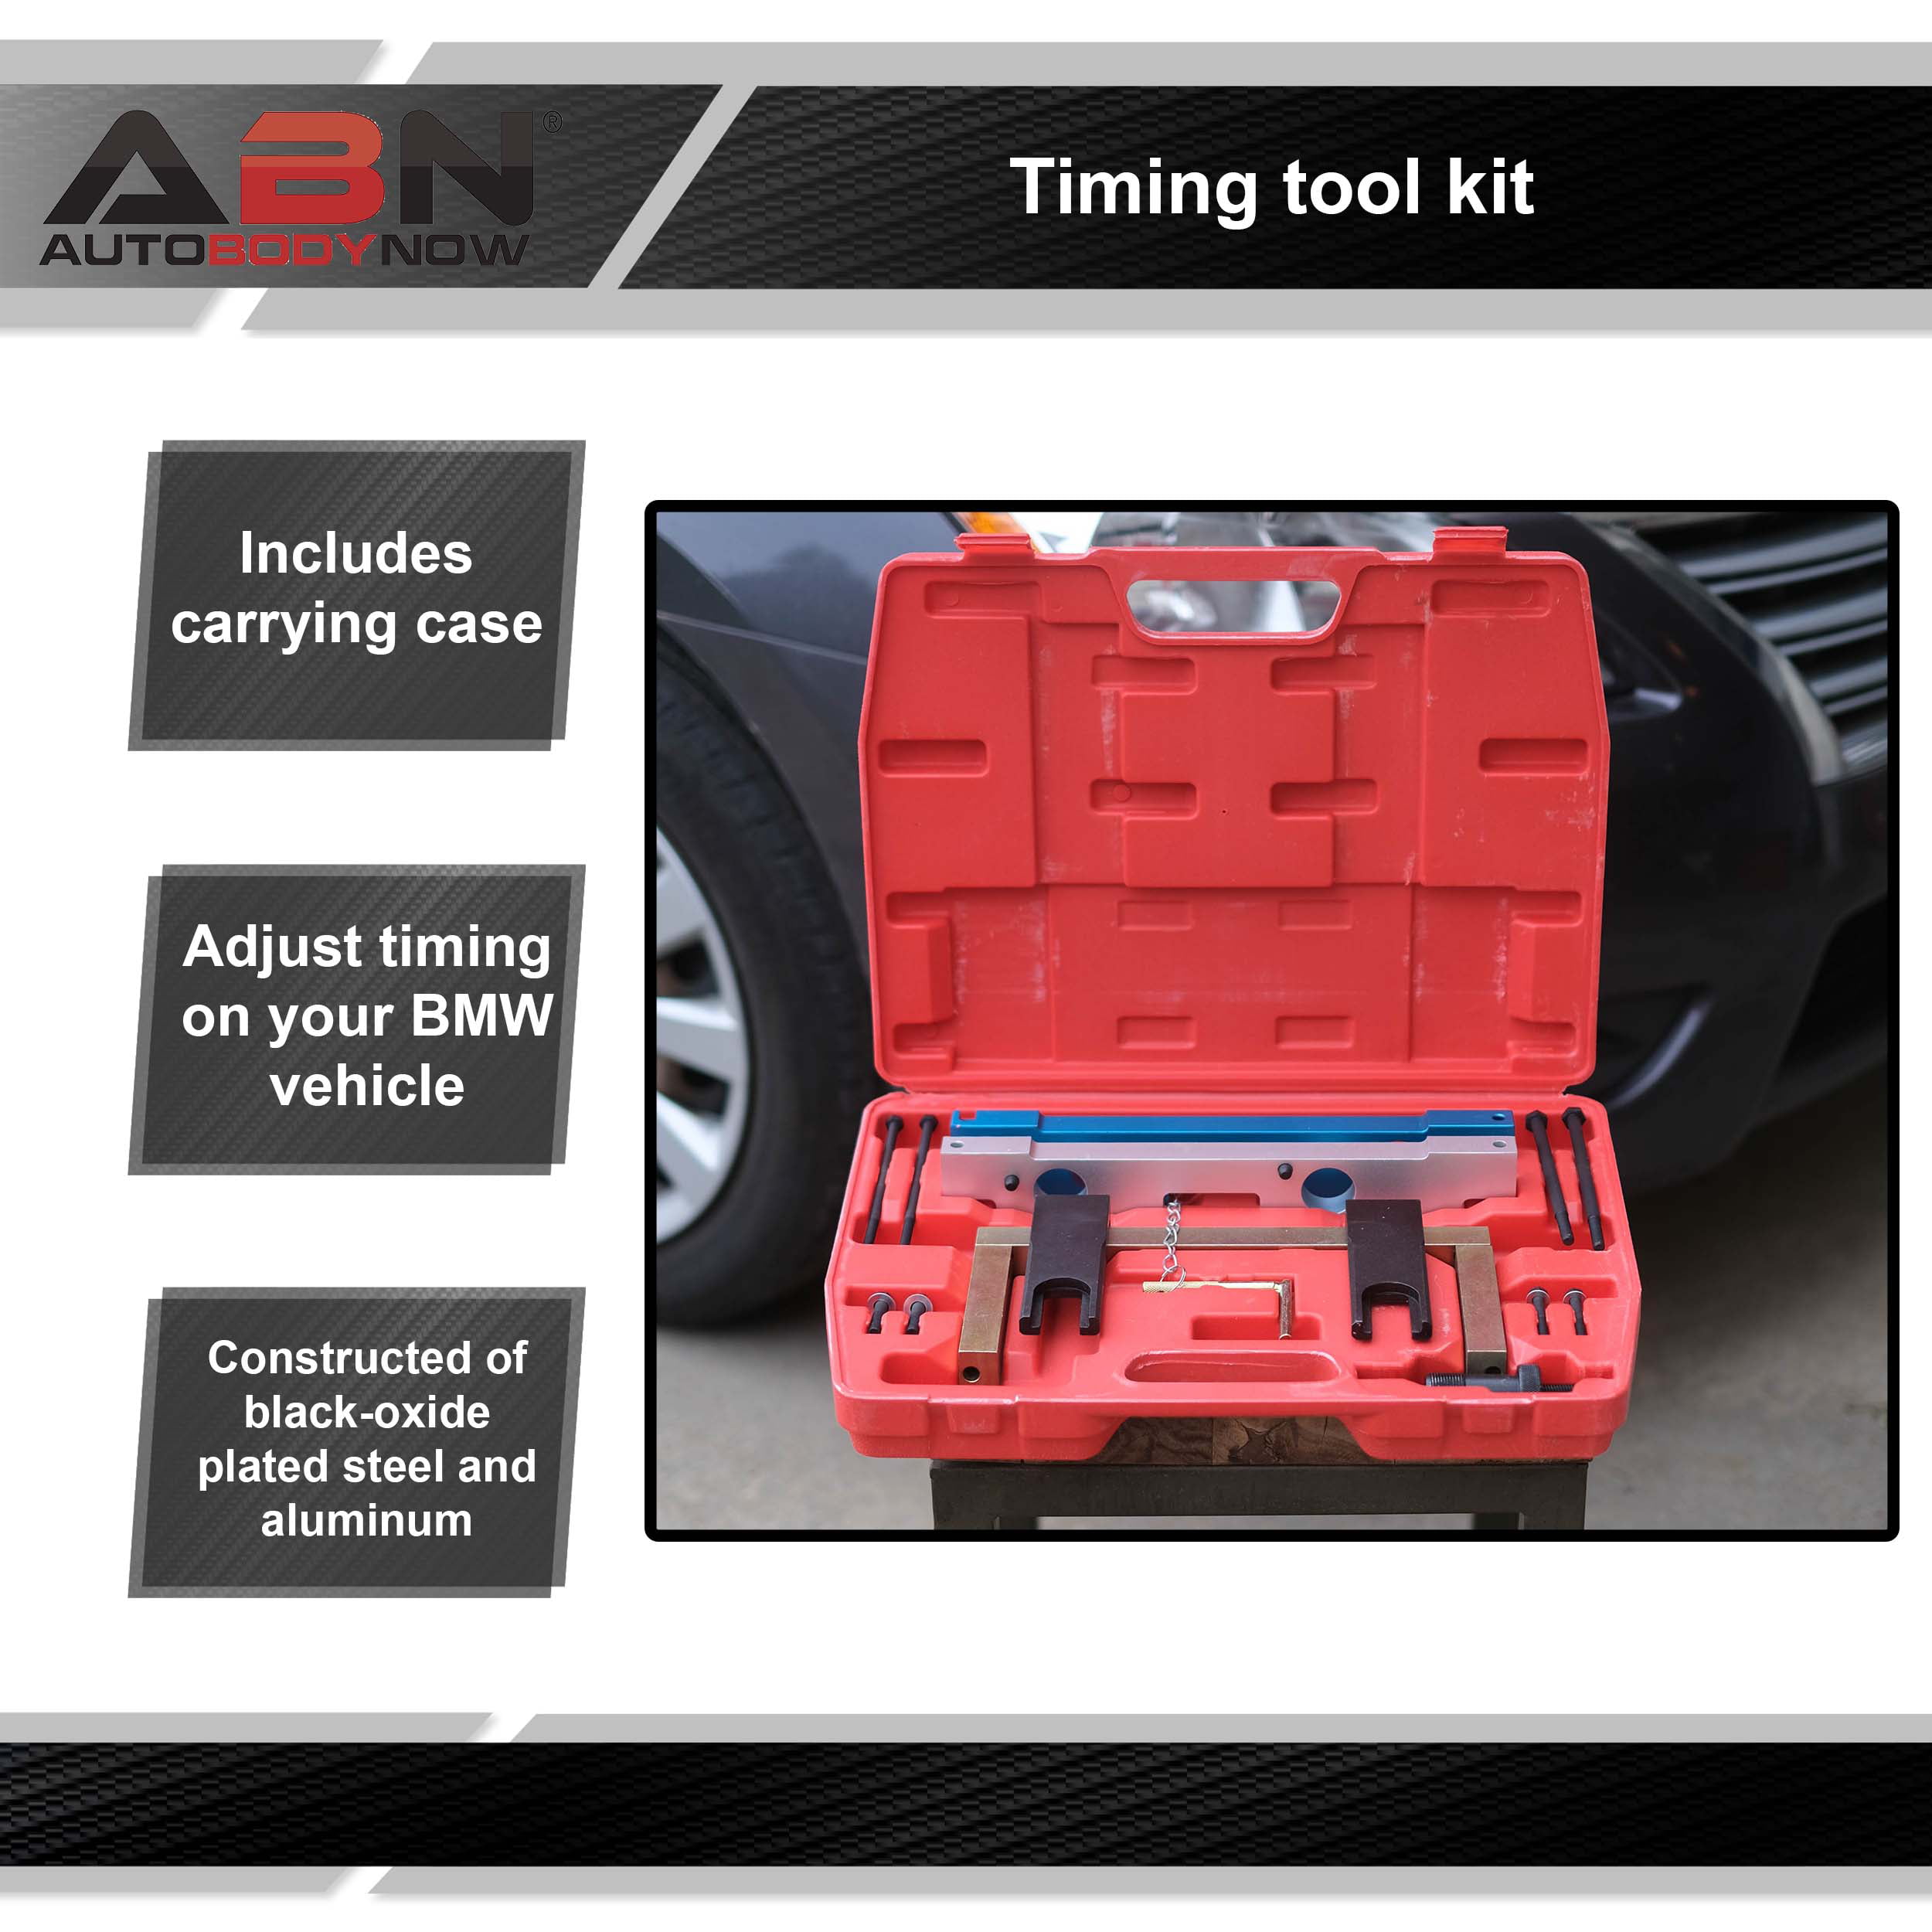 N54 N52 N53 ABN Camshaft Alignment and Engine Locking Timing Tool Kit for BMW N51 